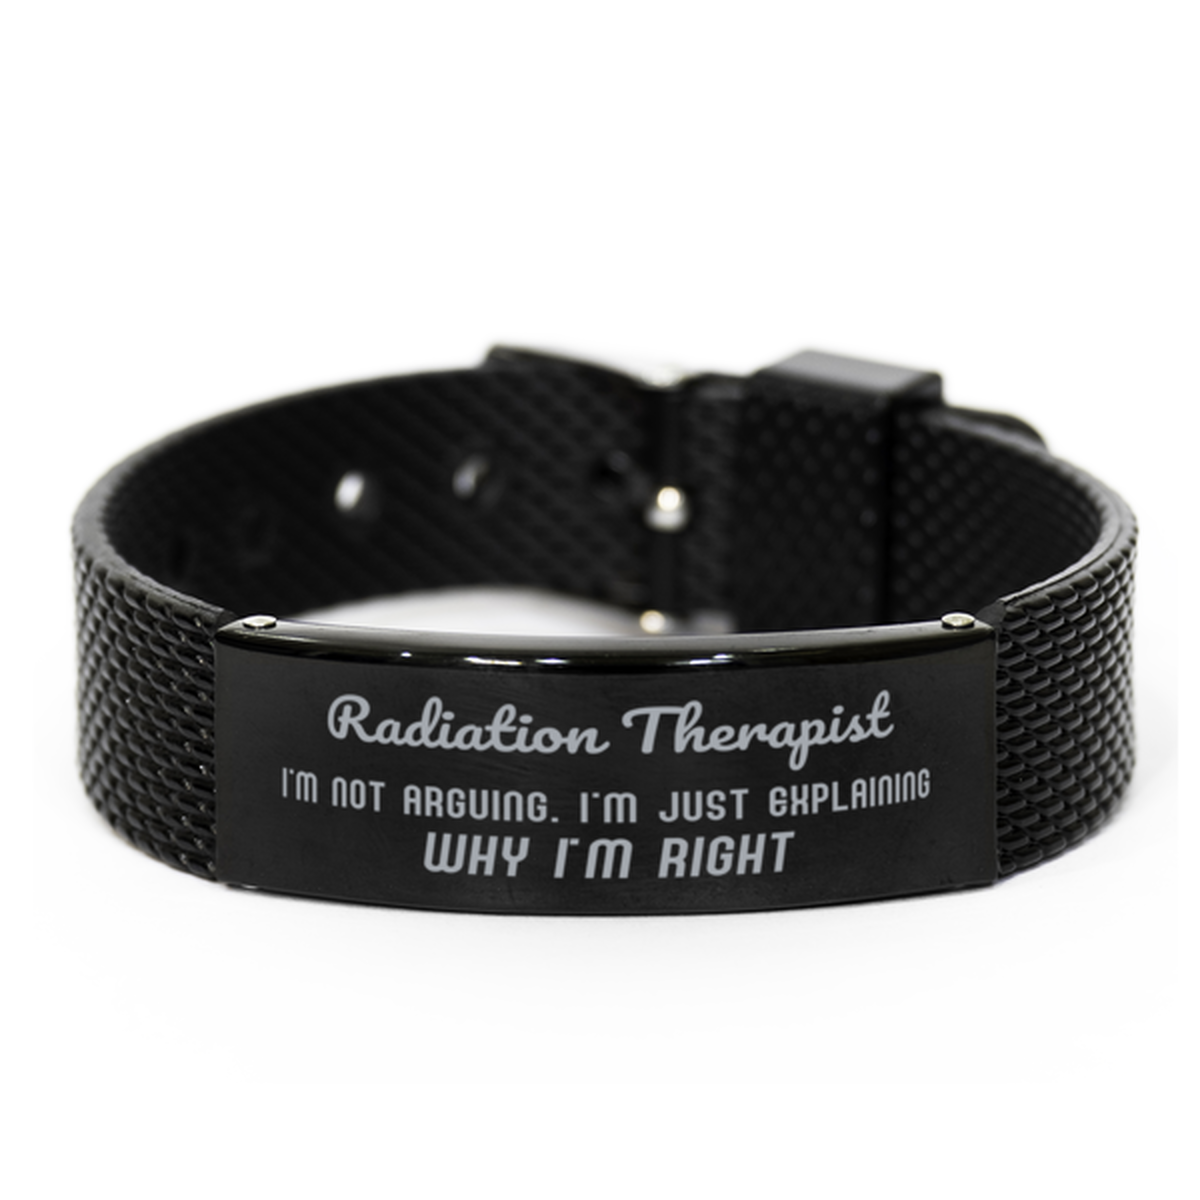 Radiation Therapist I'm not Arguing. I'm Just Explaining Why I'm RIGHT Black Shark Mesh Bracelet, Funny Saying Quote Radiation Therapist Gifts For Radiation Therapist Graduation Birthday Christmas Gifts for Men Women Coworker